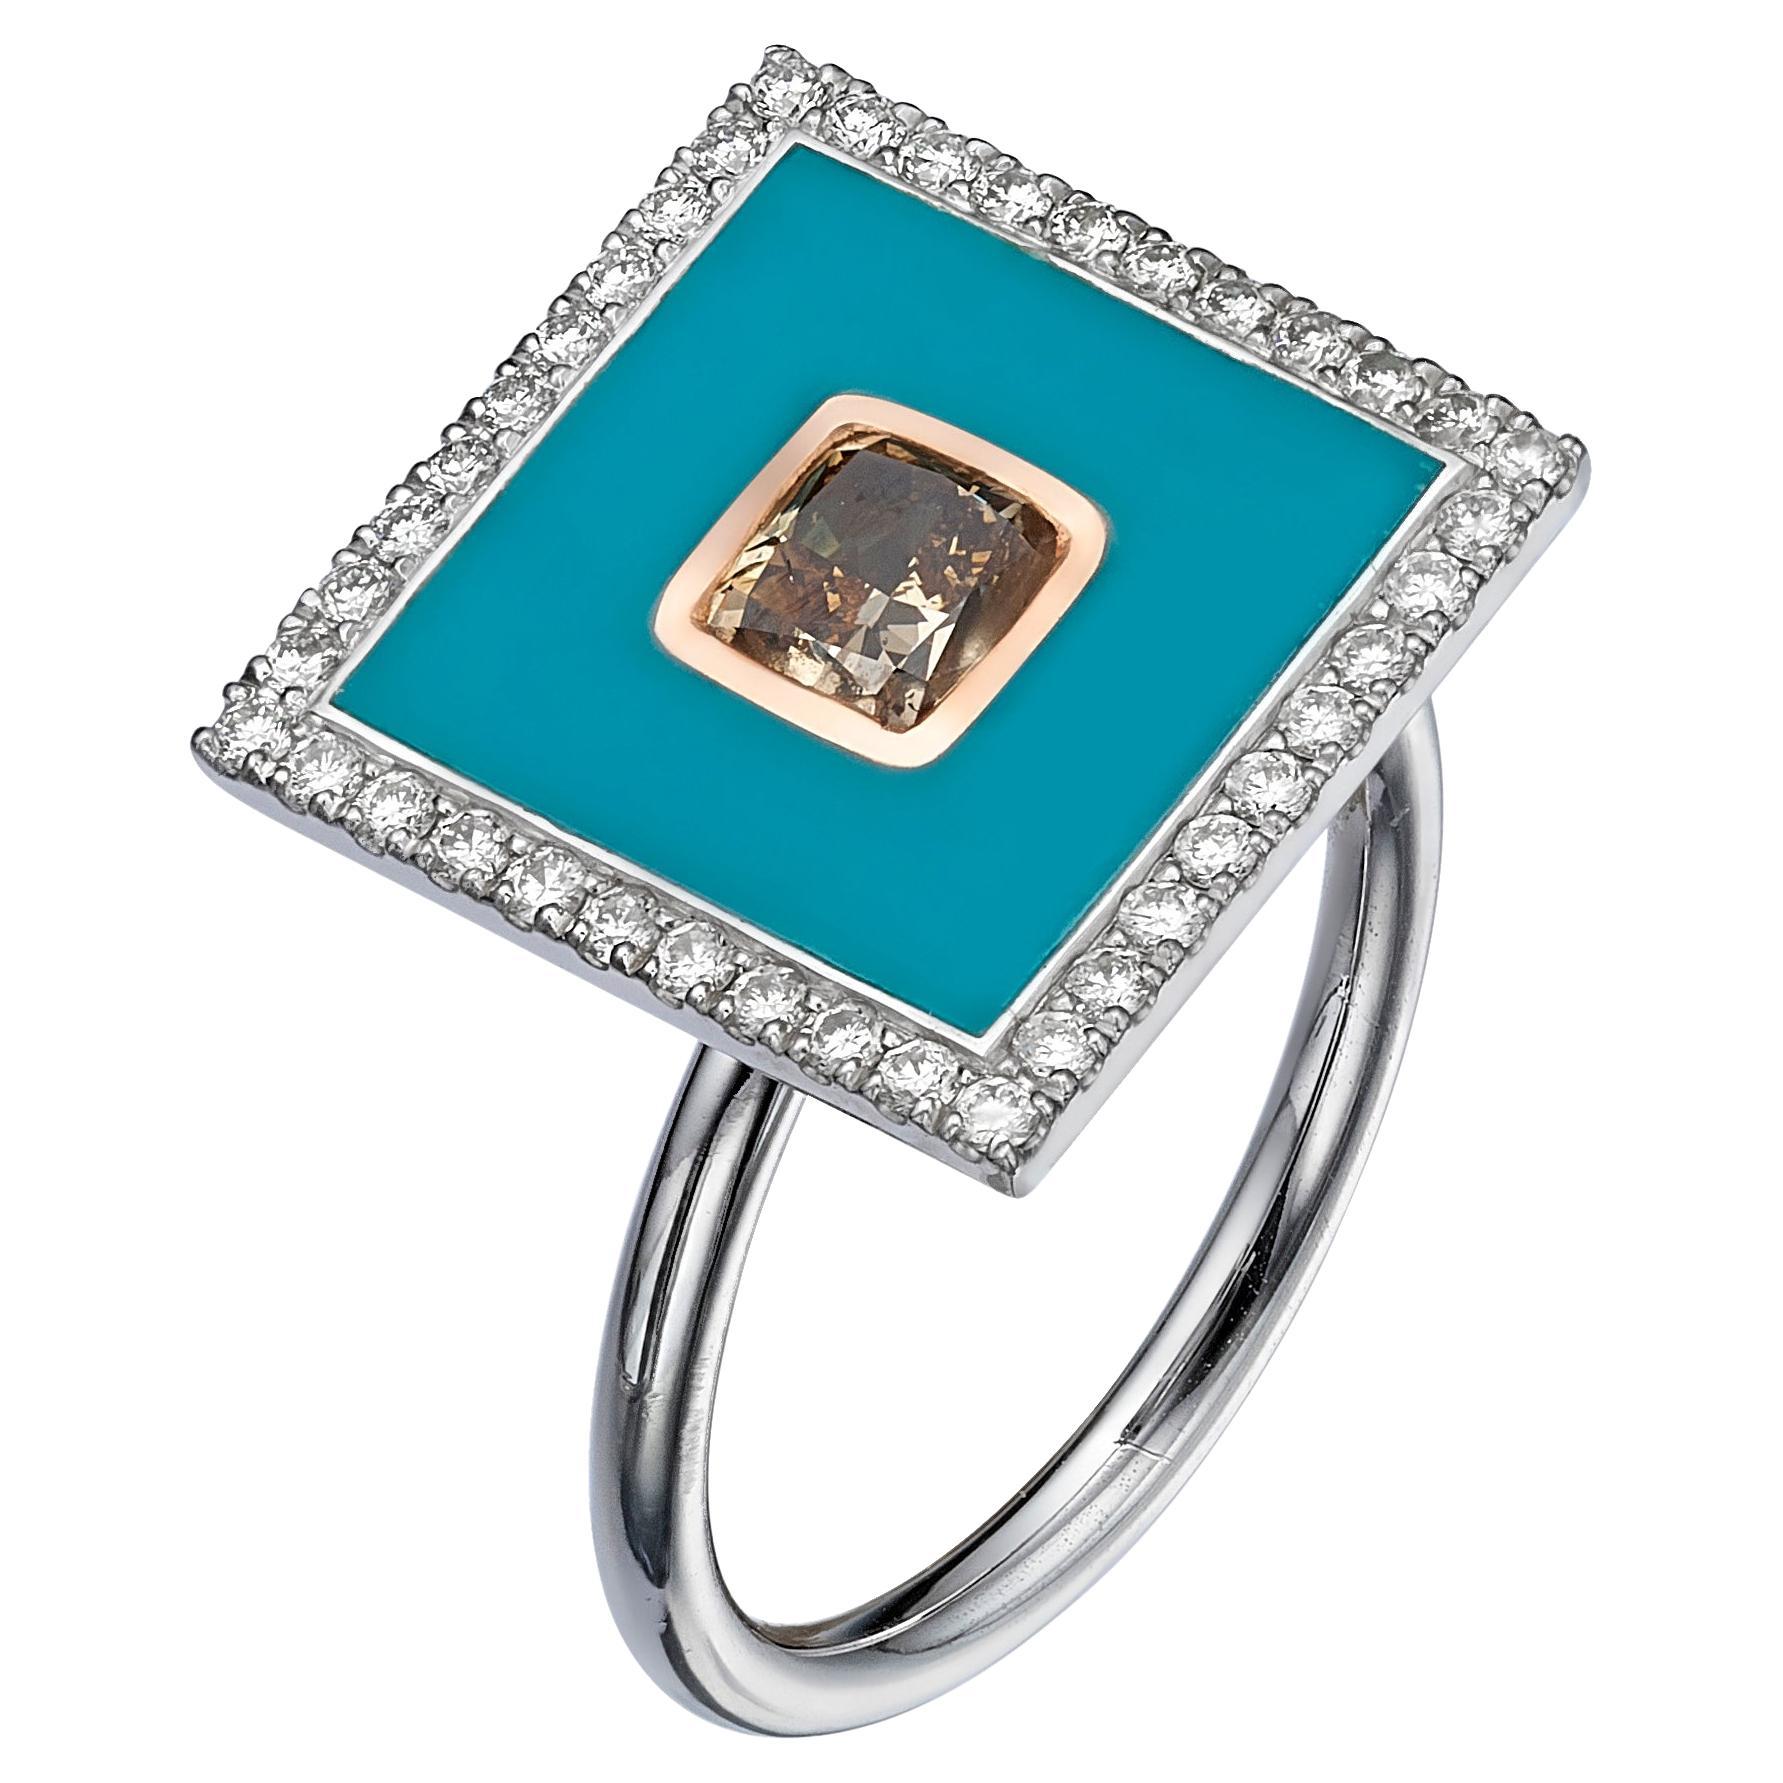 Venice Collection: Square-Shaped 18k White Gold Diamond Ring with Blue Enamel